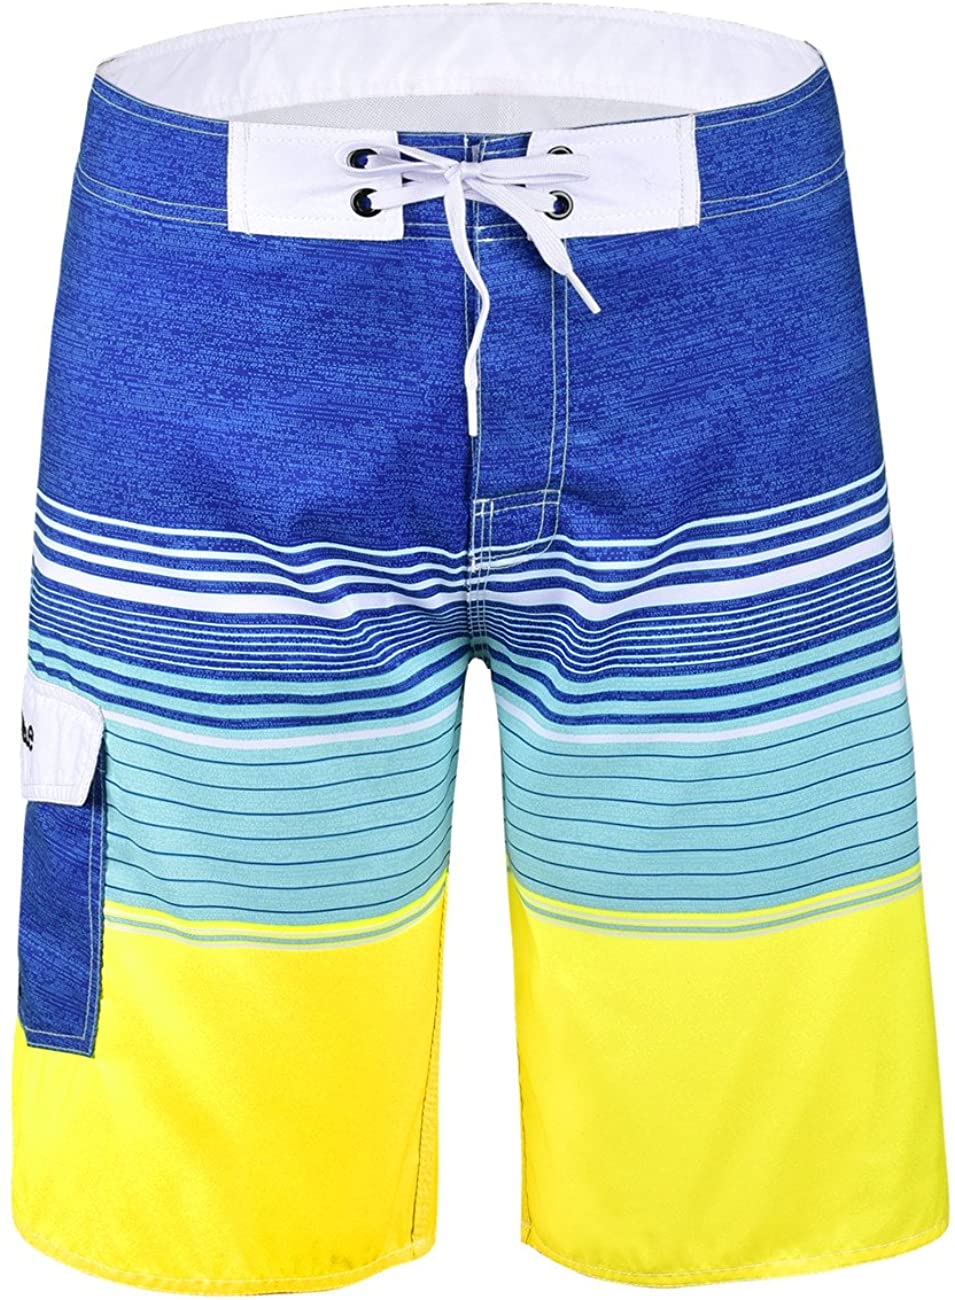 Nonwe Men's Quick Dry Wave Pattern with Mesh Lining Board Shorts 